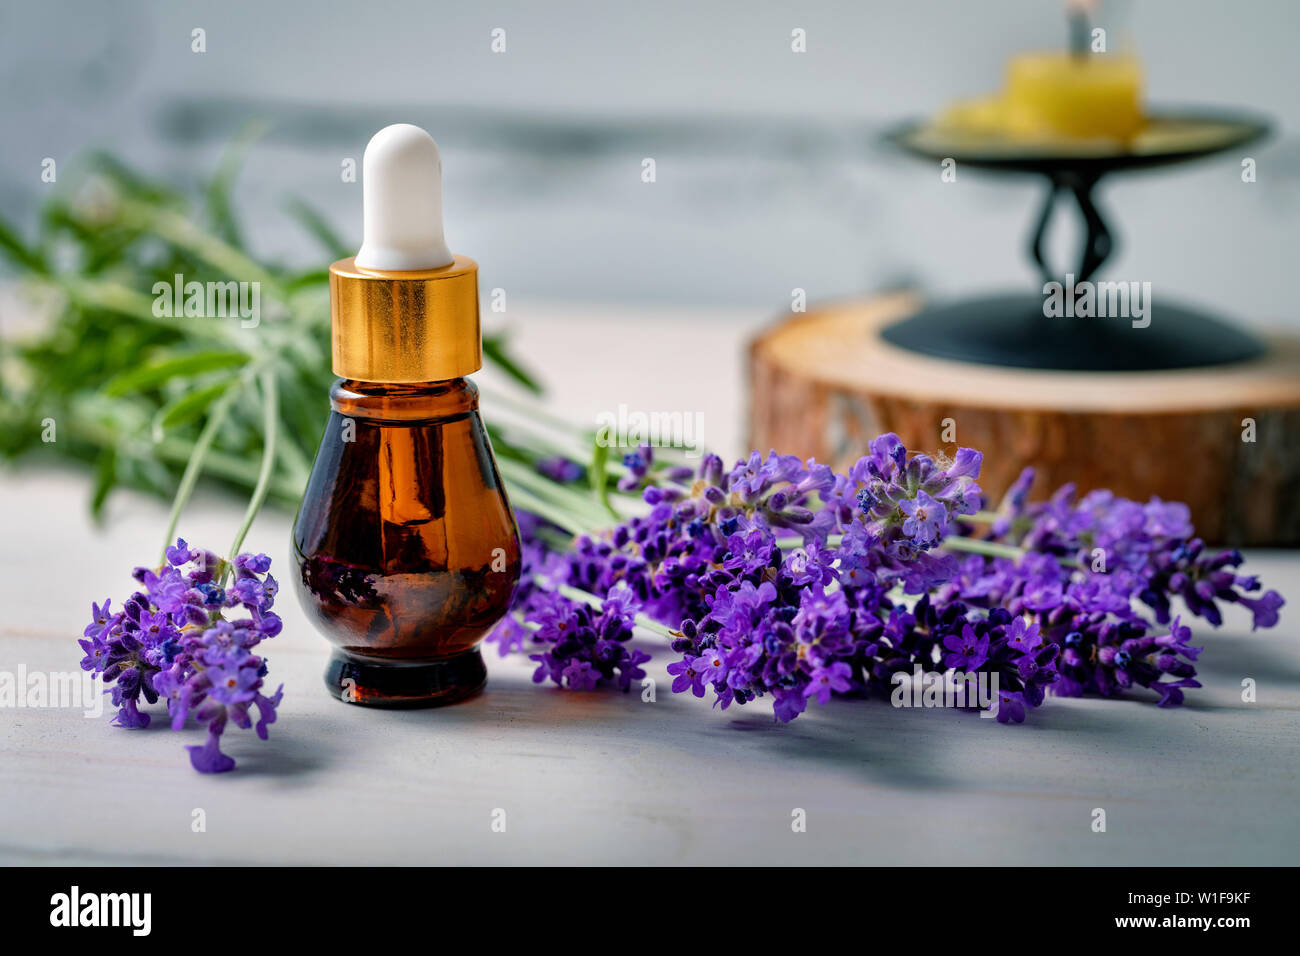 aromatherapy - lavender essential oil bottle with fresh flower twigs and candle Stock Photo